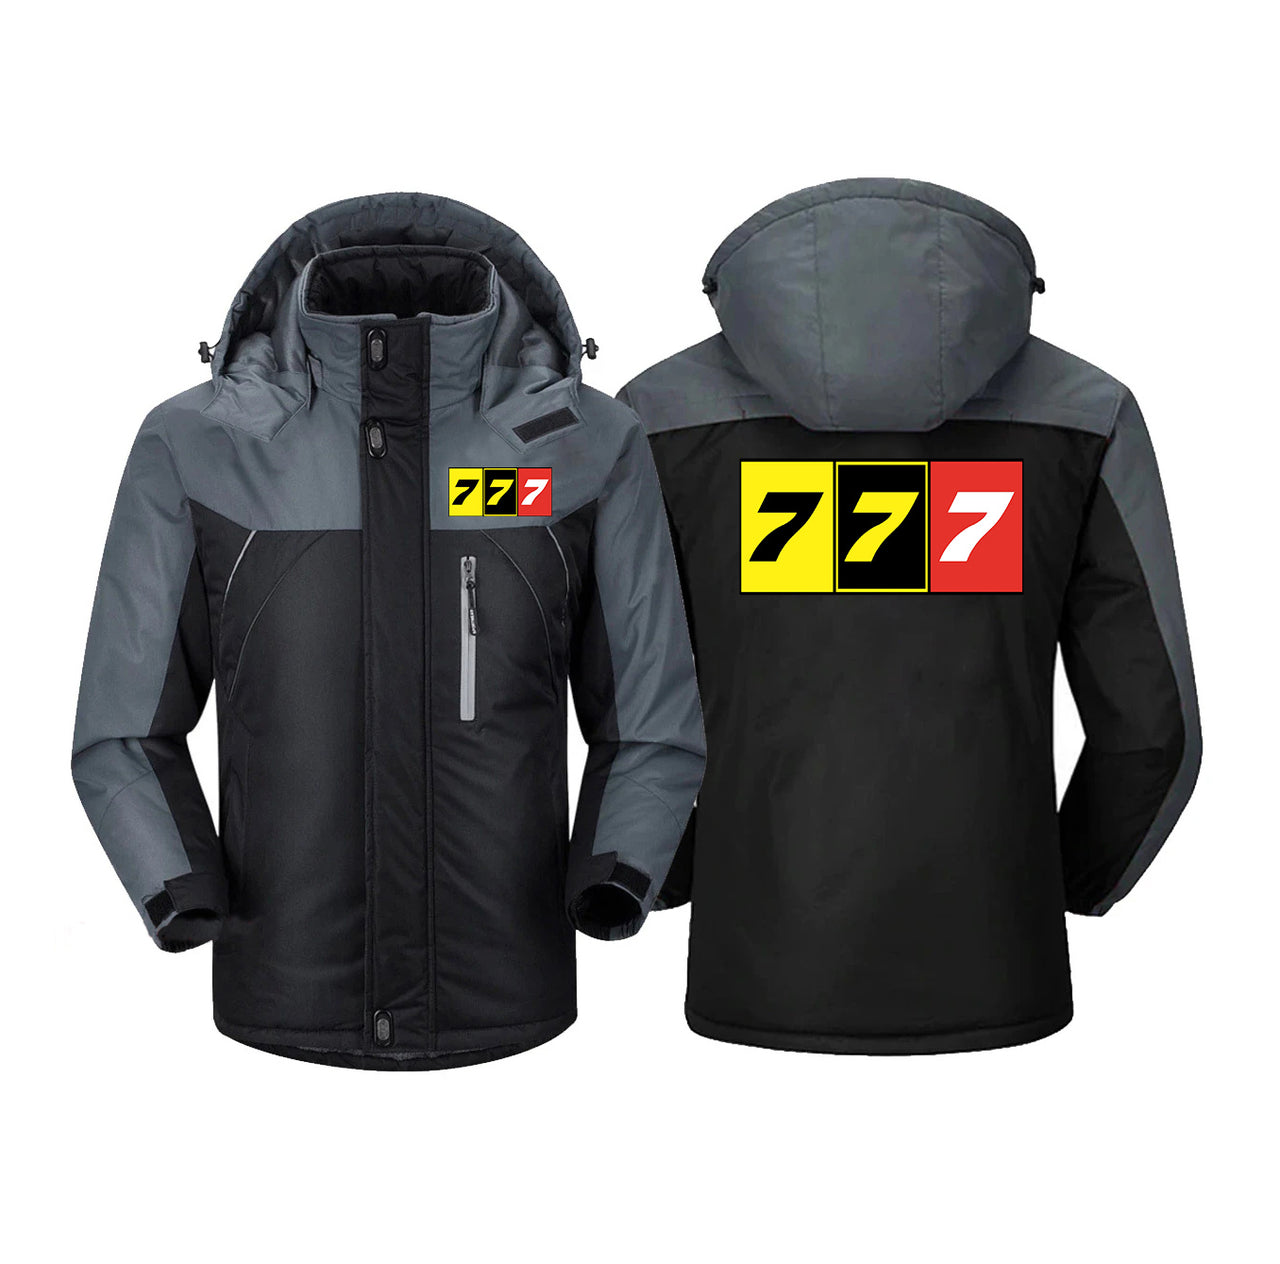 Flat Colourful 777 Designed Thick Winter Jackets